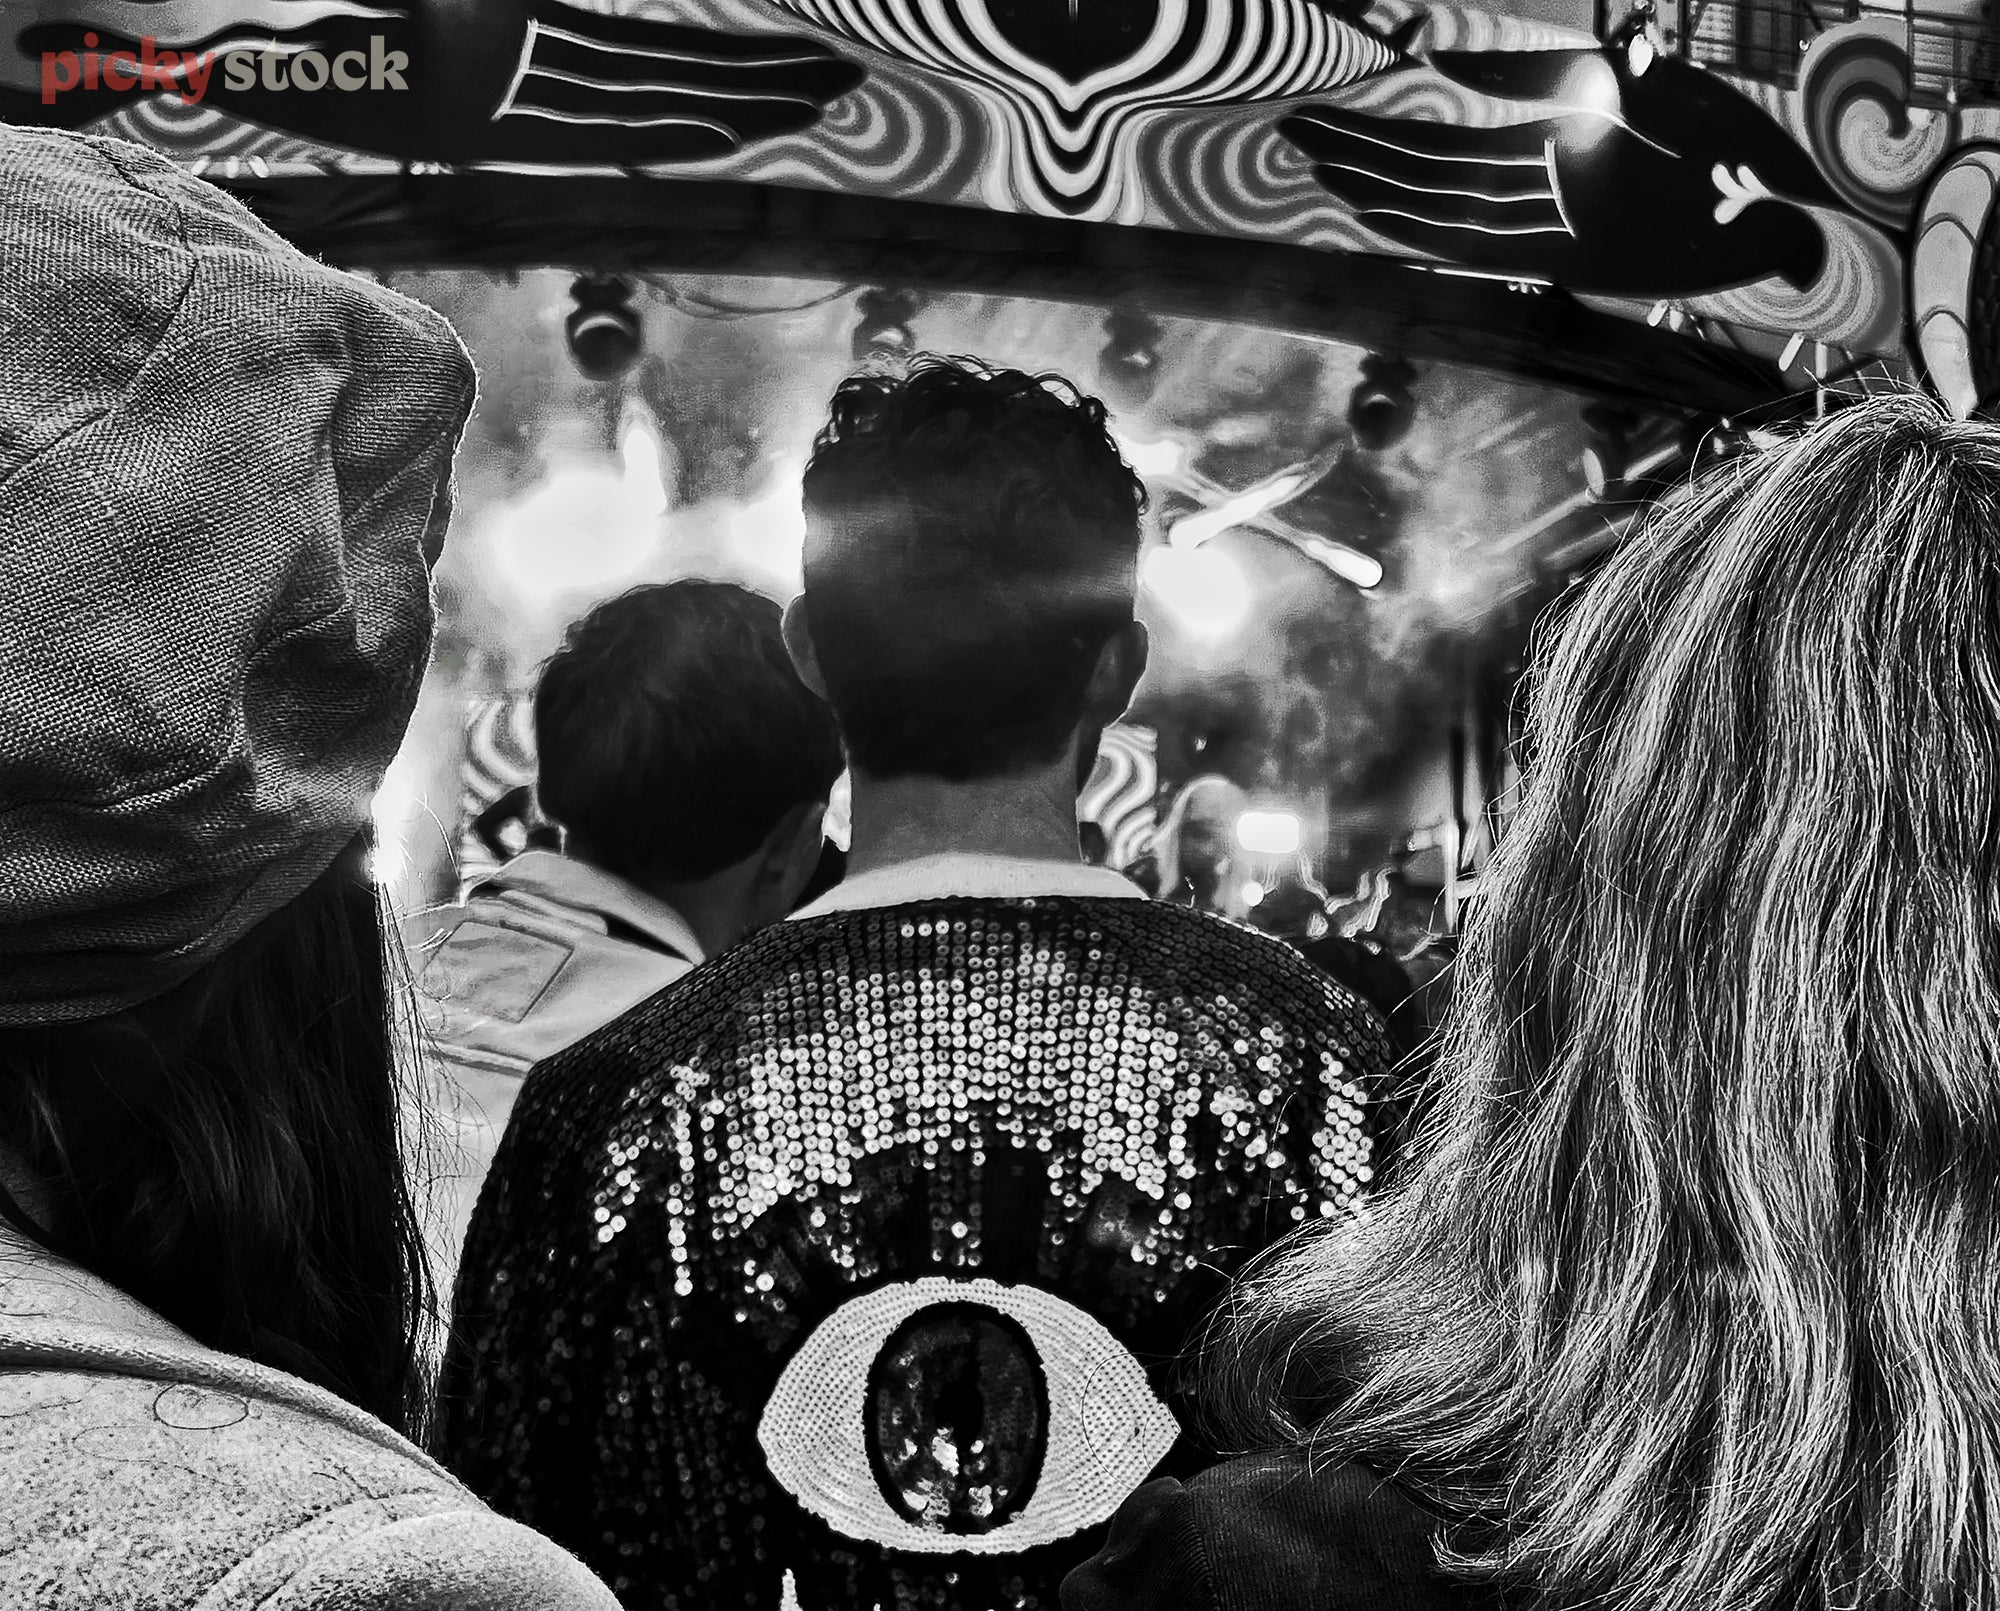 Black and white observational image in a music crowd. The viewer looks over the shoulders of a male and a female, towards a tall youn male with a sequined black jacket with a graphic eye on it. 